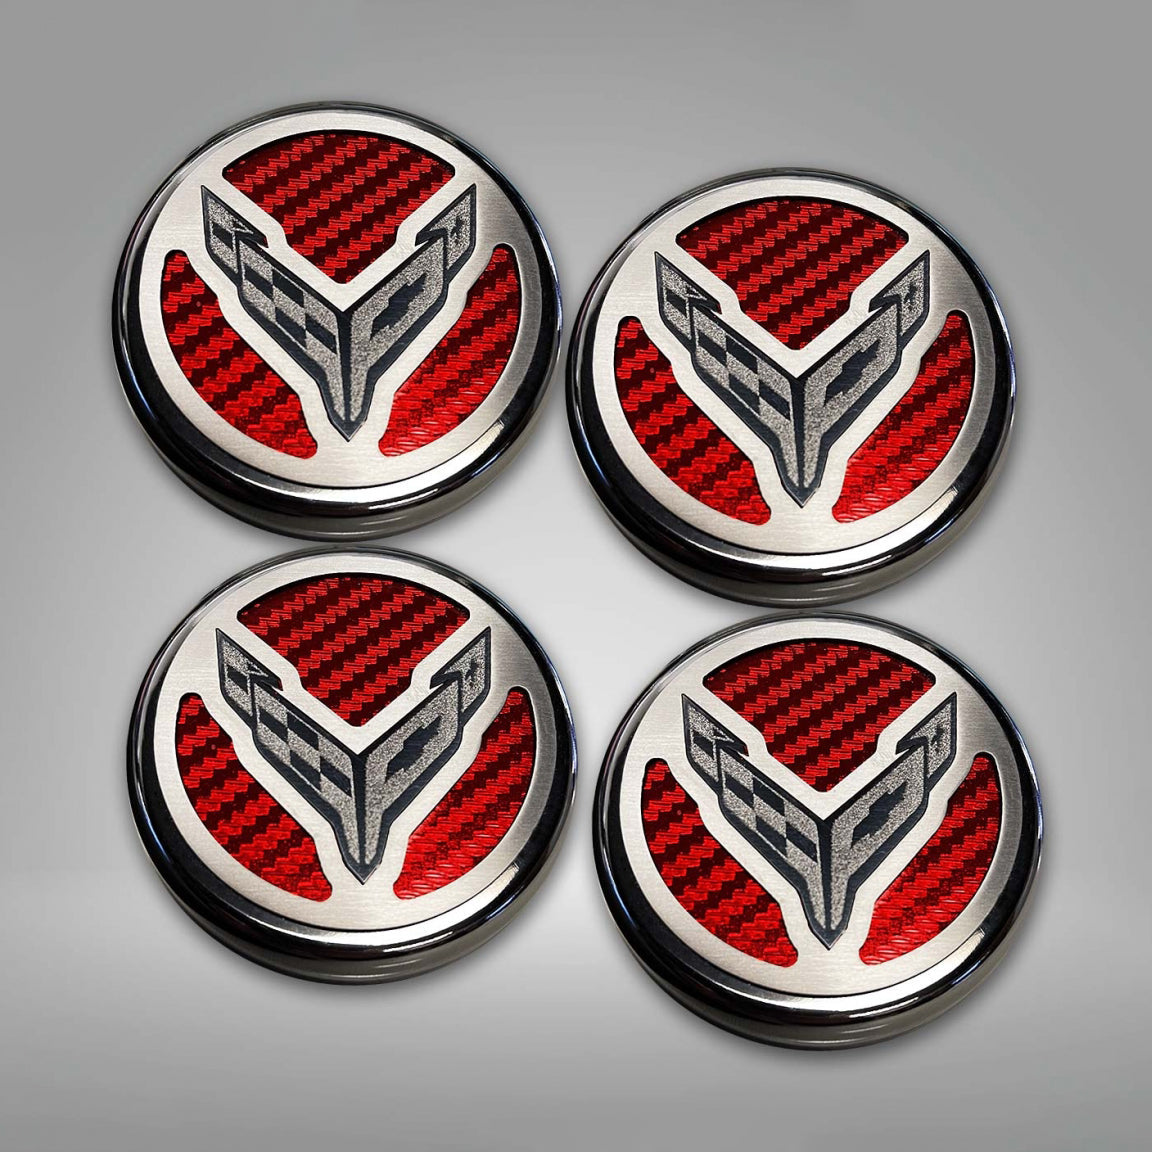 2020-2024 C8 Corvette Coupe - Cap Cover Set 4pc Carbon Fiber Inserts with Stainless Crossed Flags Logo - Polished/Brushed Finish